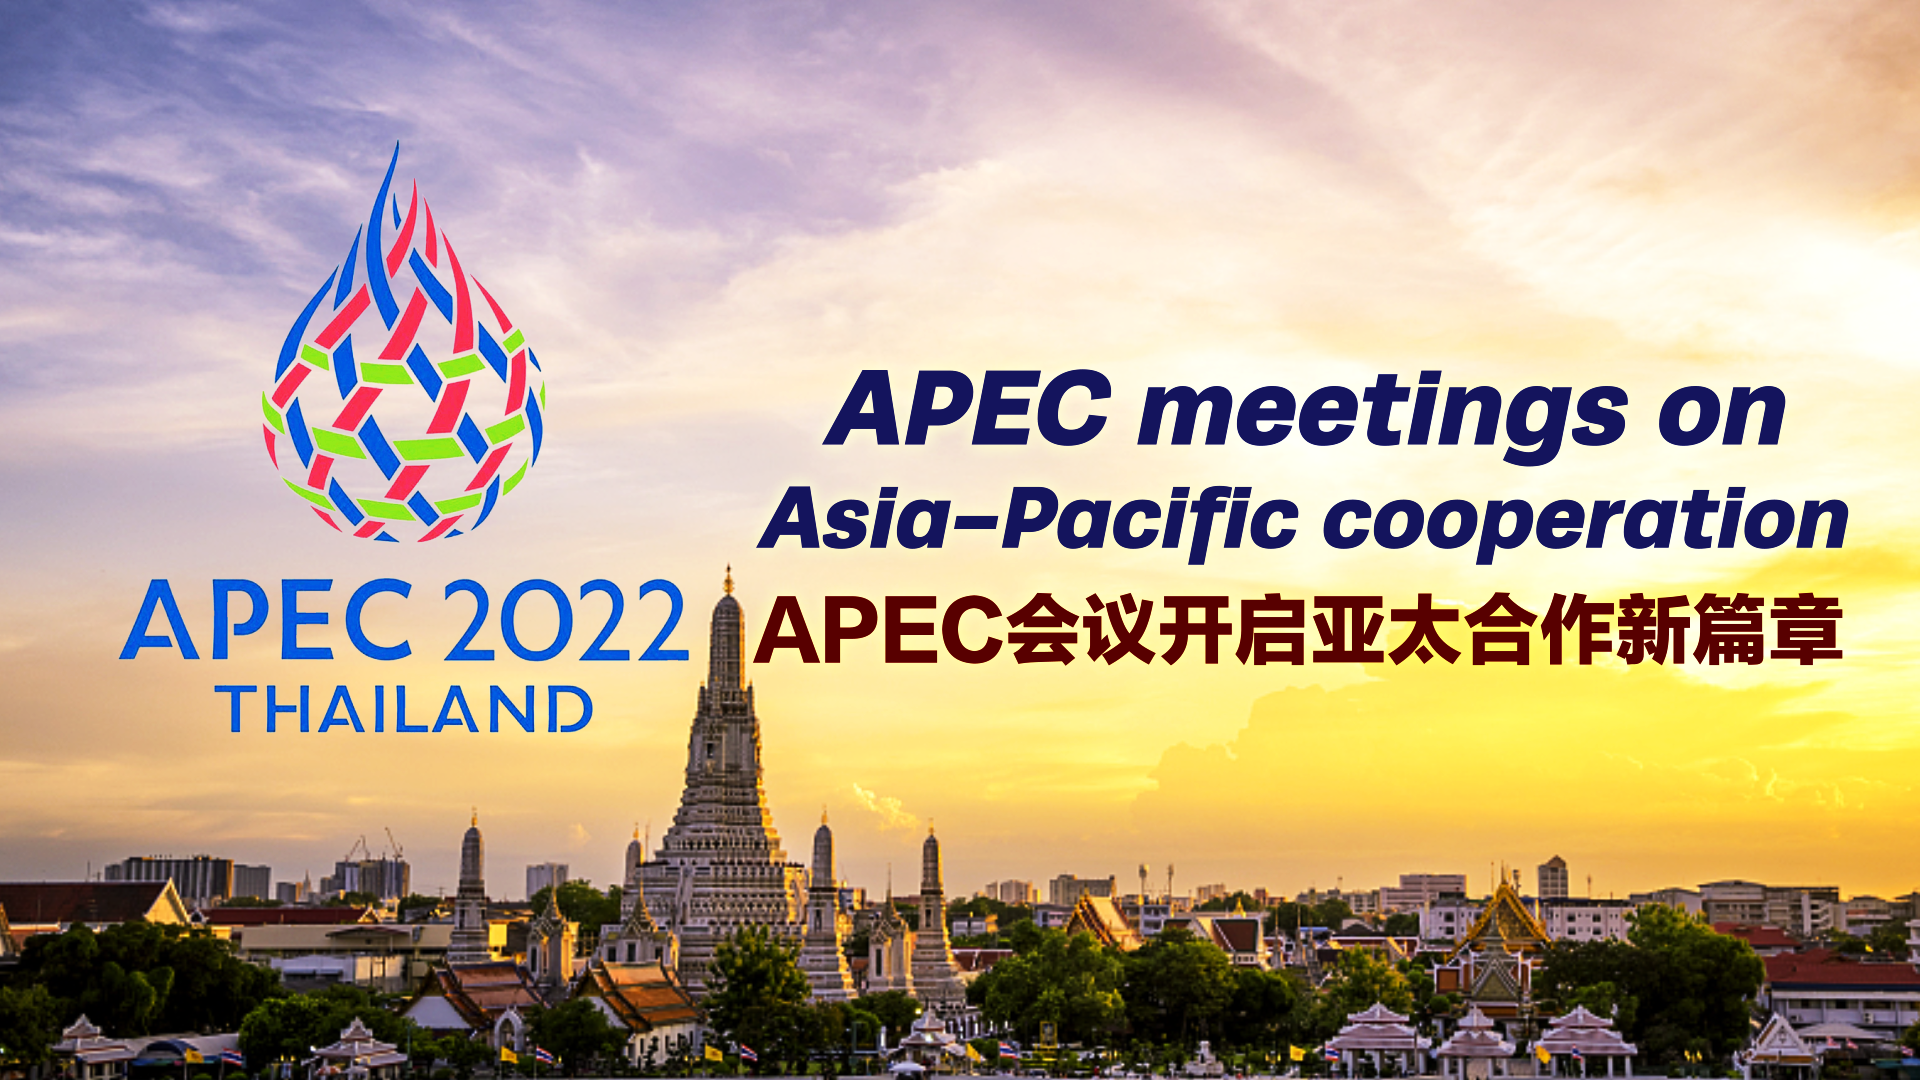 Watch: APEC meetings discuss path to recovery and growth